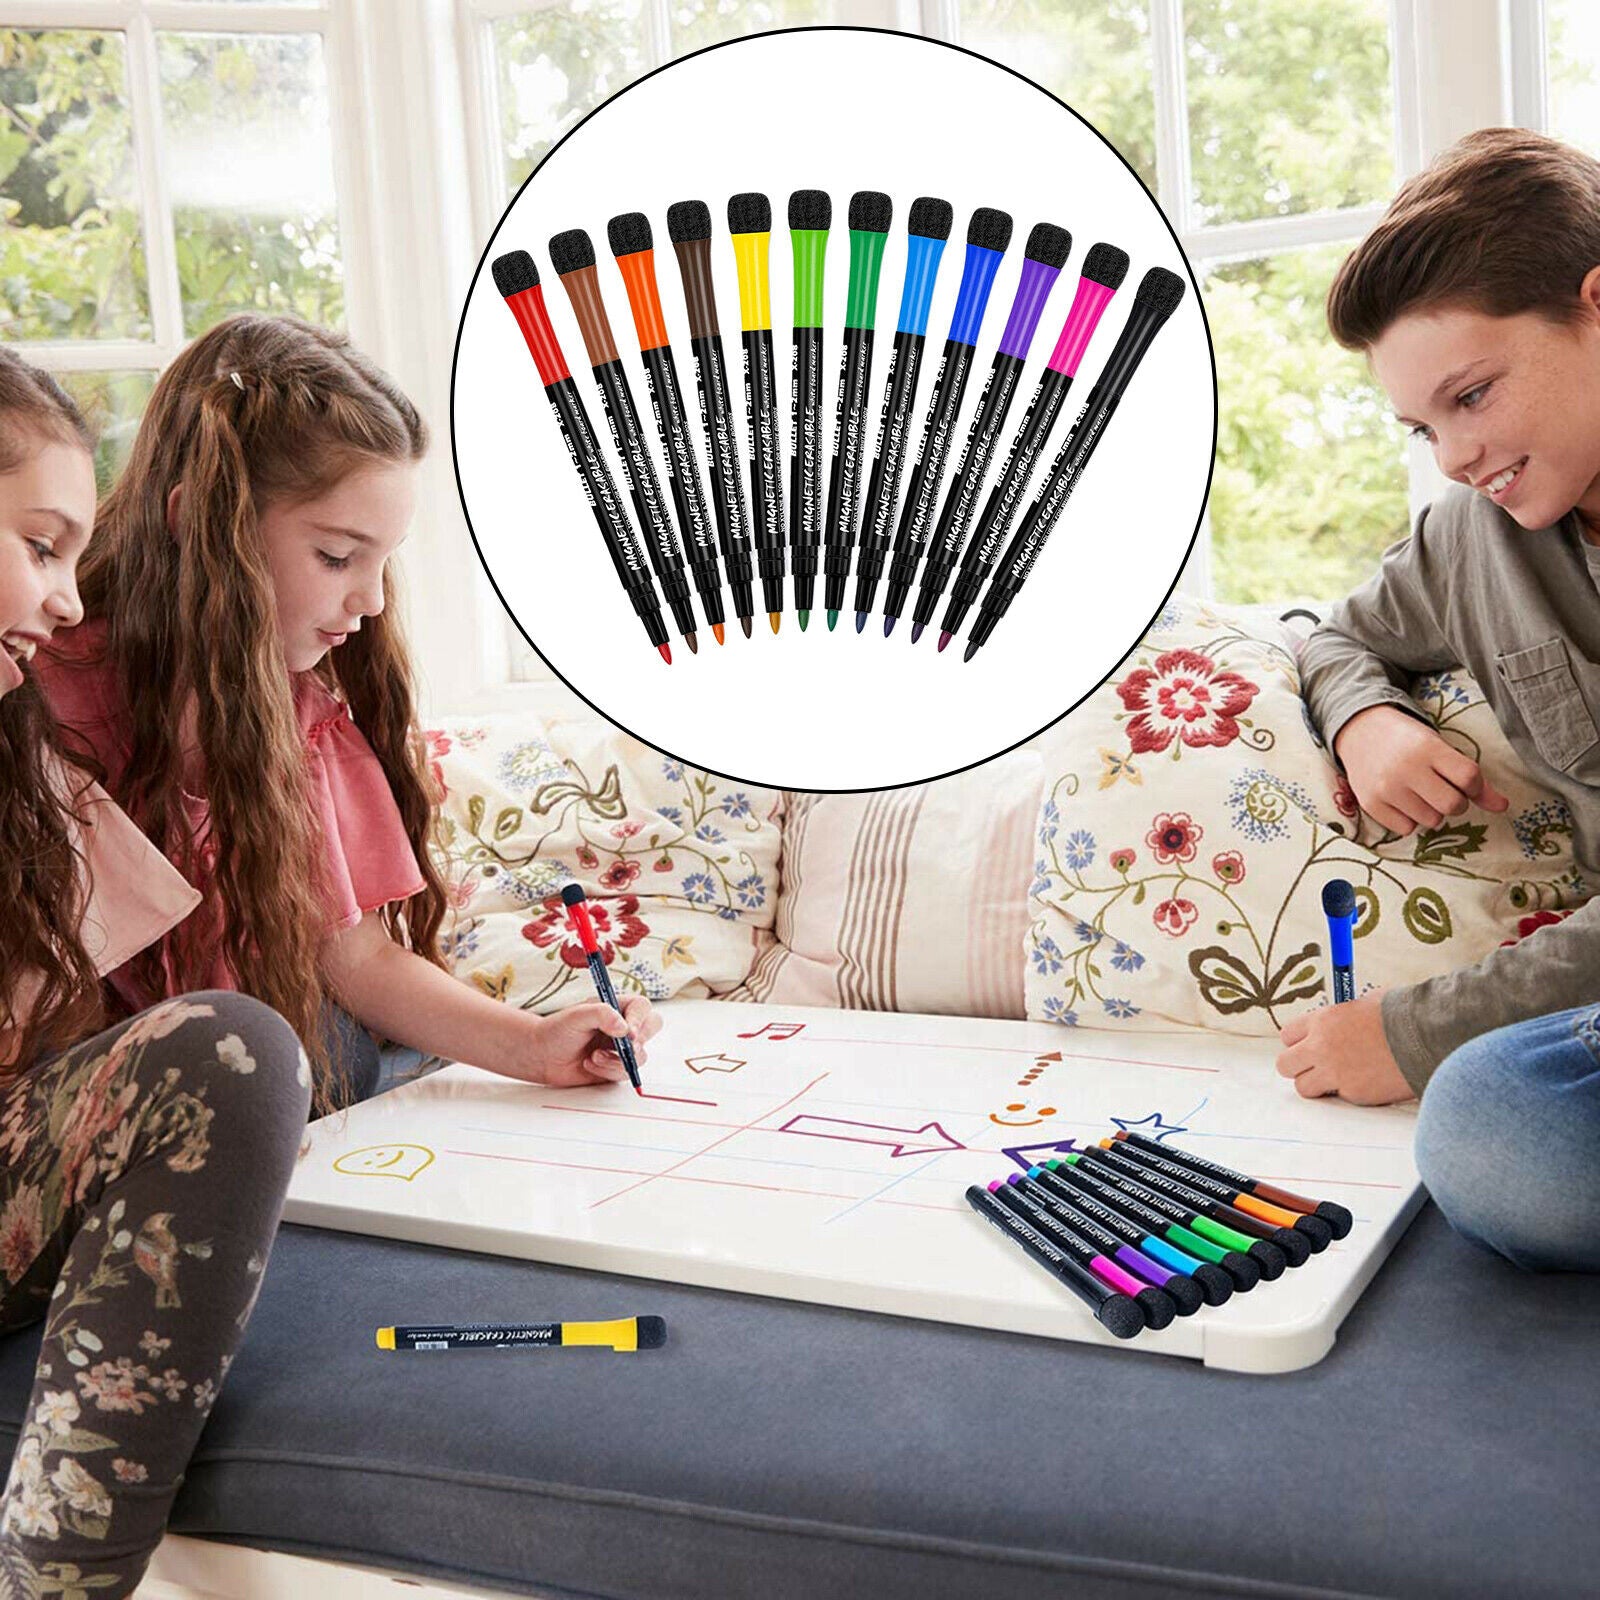 12 Pack Dry Erase Mirror Markers Erasable Whiteboard Maker Pens Low Odor